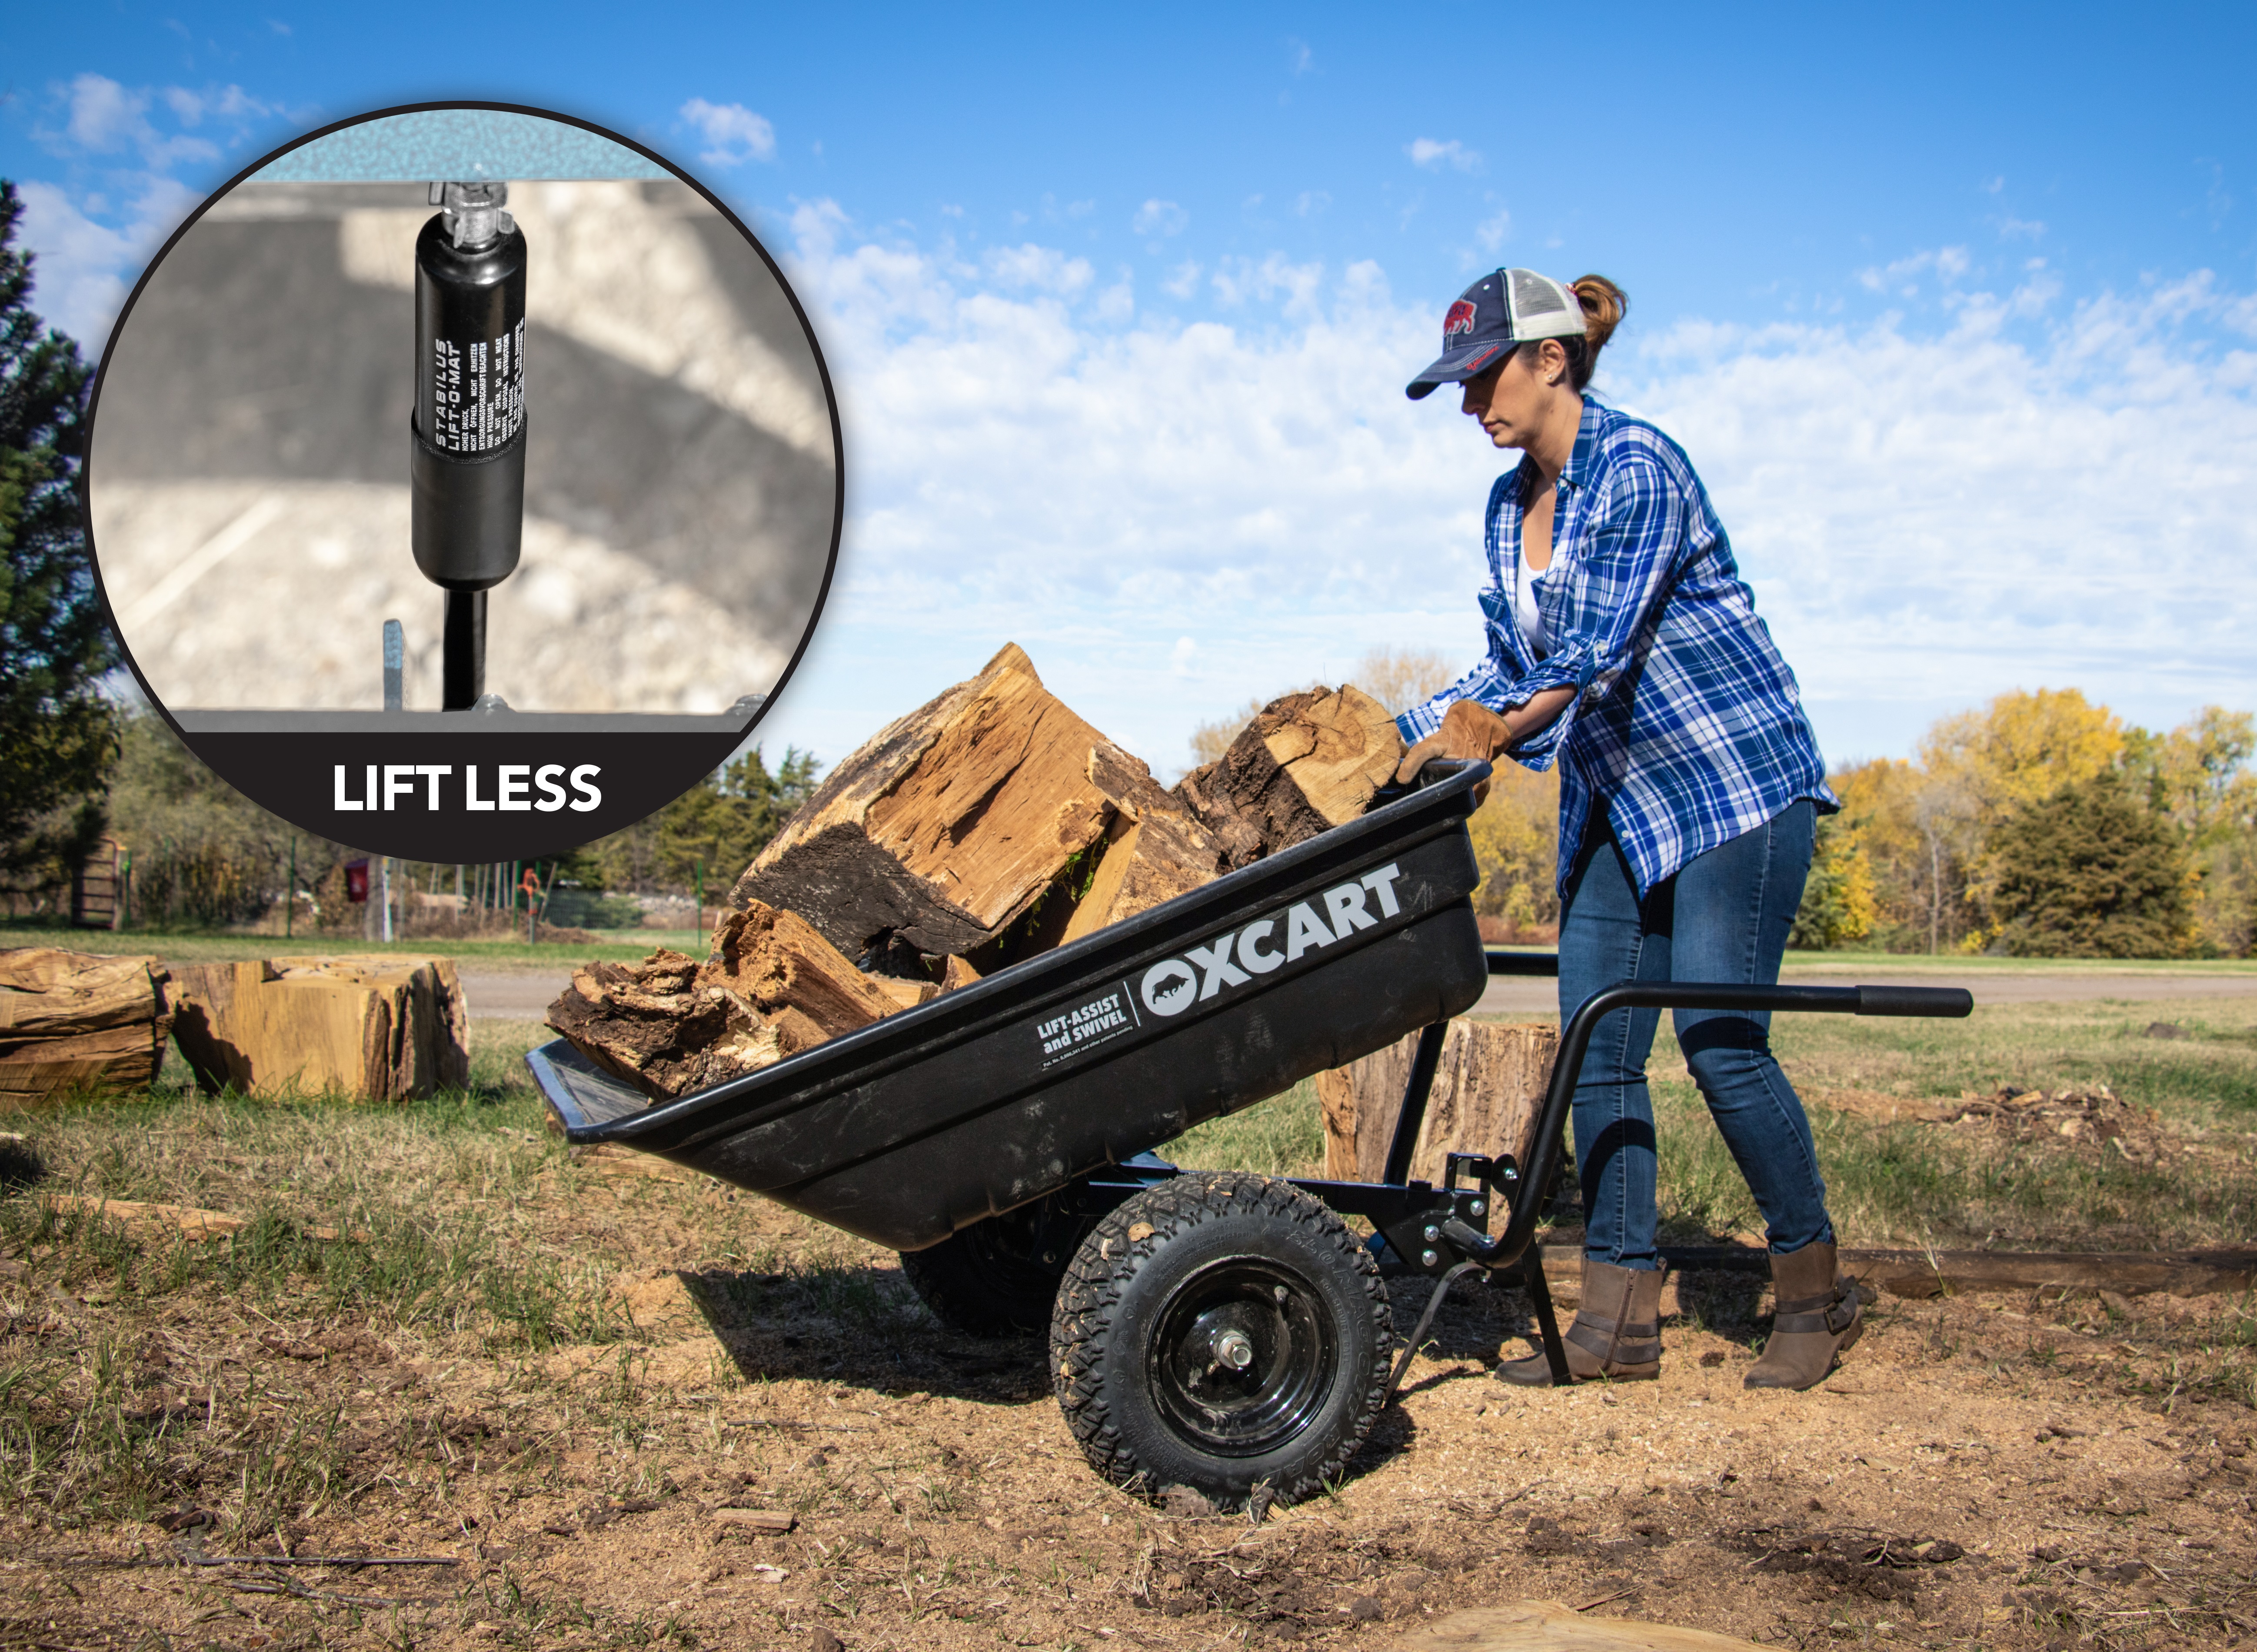 The OxCart utility cart offers time-saving capabilities making life better for hunters, farmers, ranchers and, well, basically anyone who maintains a property.